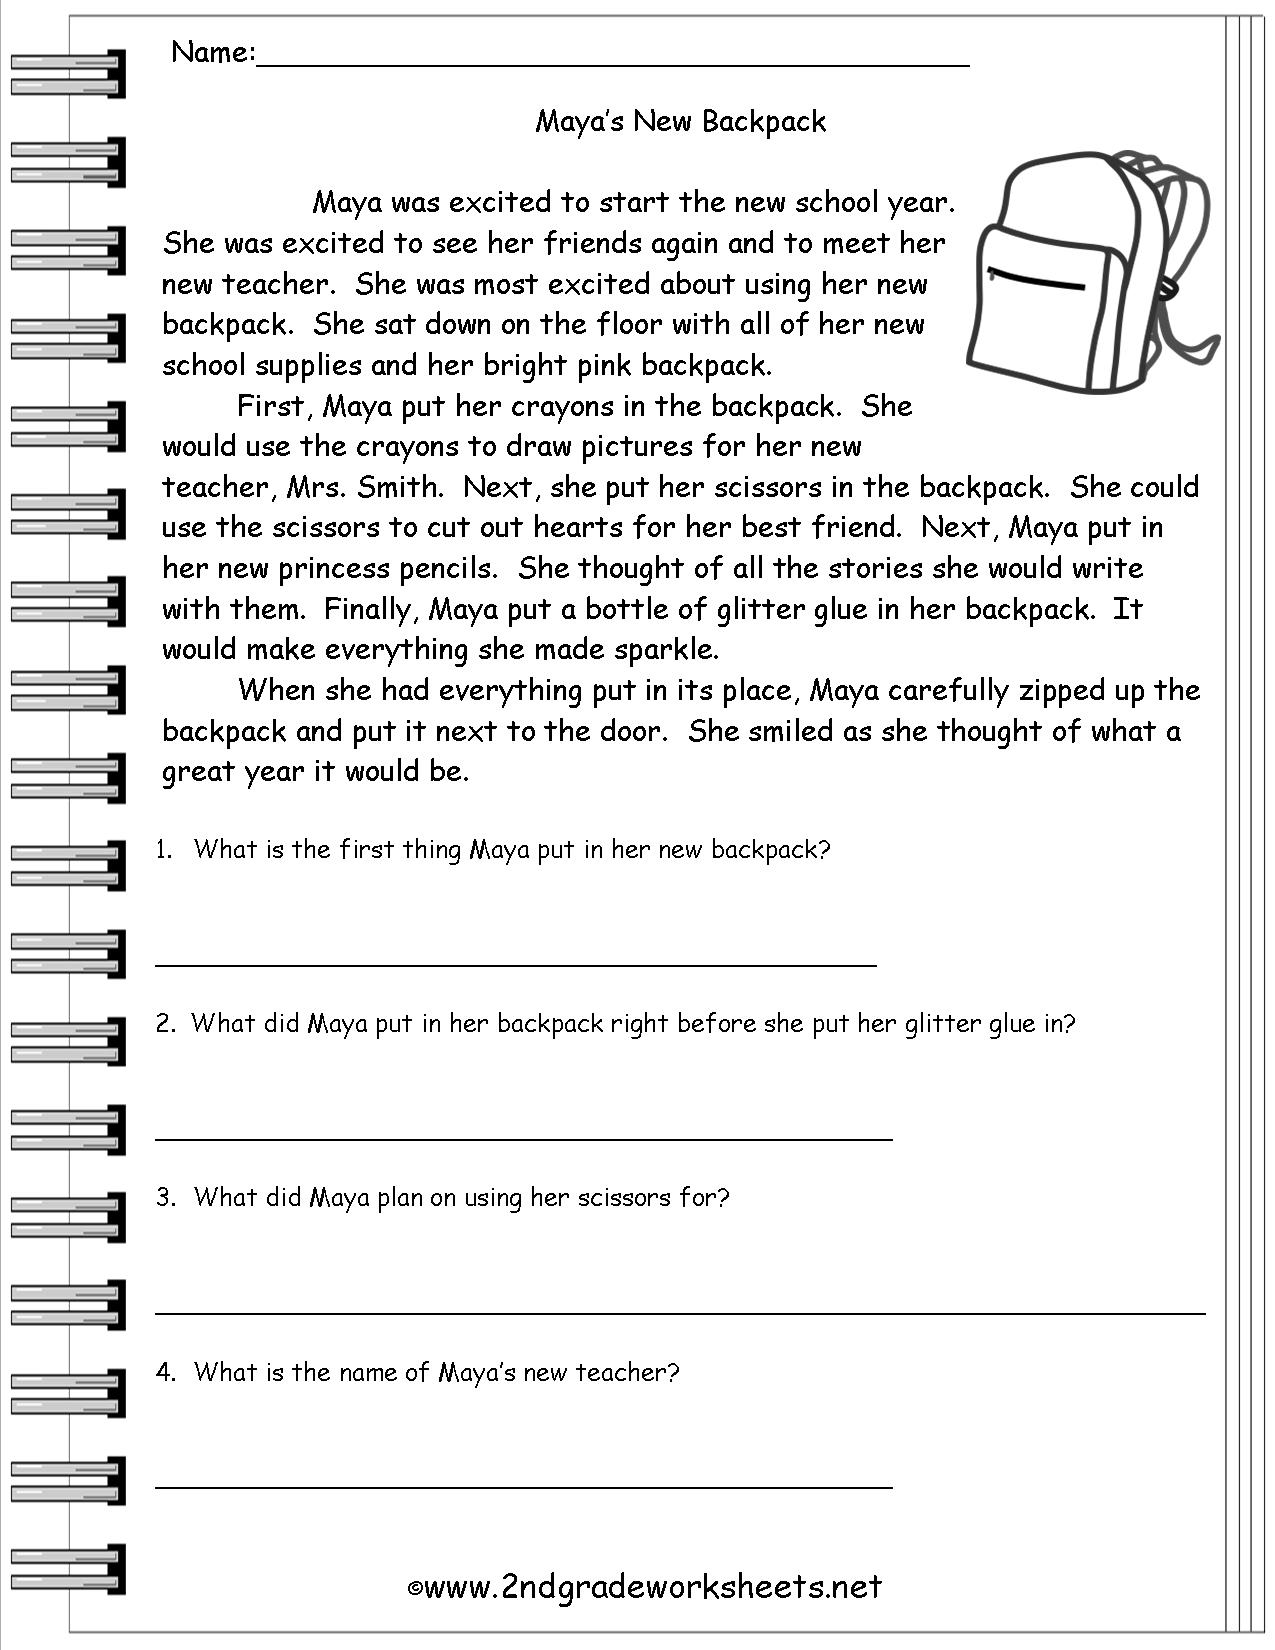 14 Images of Printable Reading Worksheets With Questions